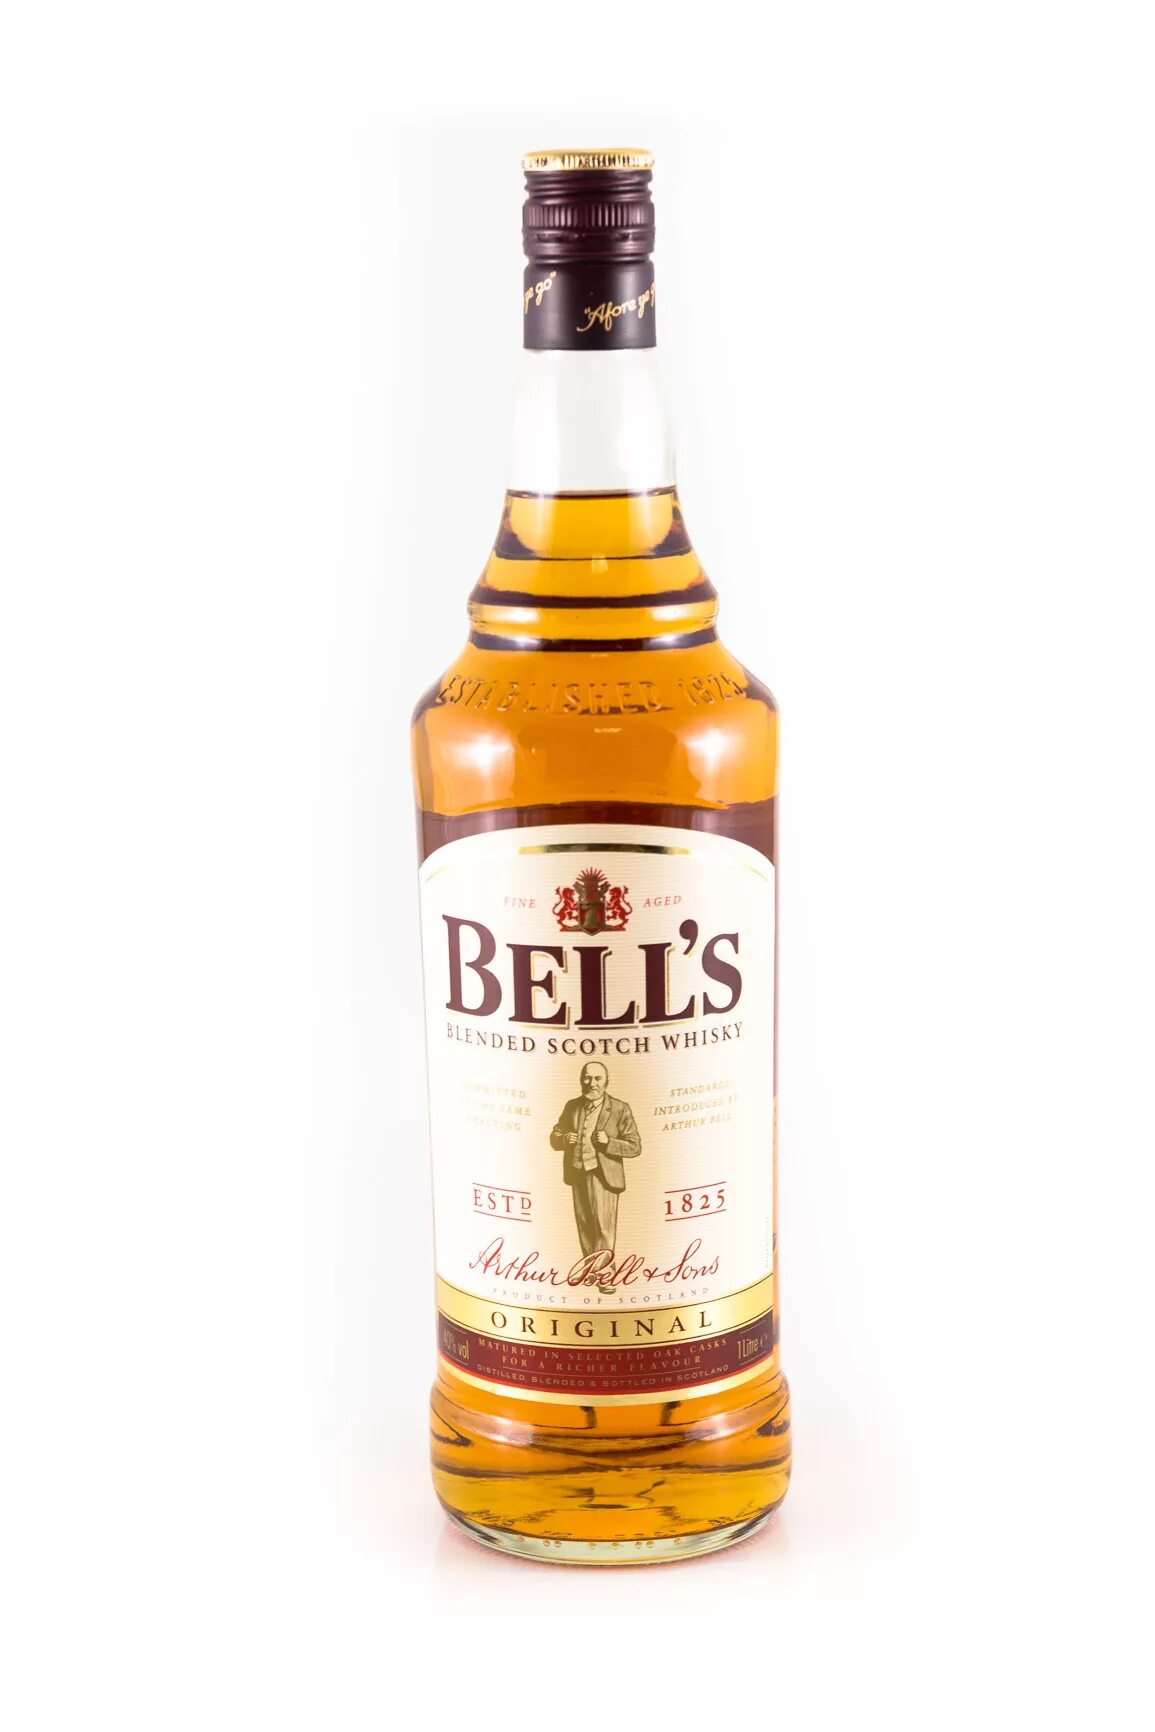 Bells Blended Scotch Whisky. Bell's Blended Scotch Whisky 0.5. Виски Bell's Original, 1 л. Виски Bells Original 0.7. Bells whisky